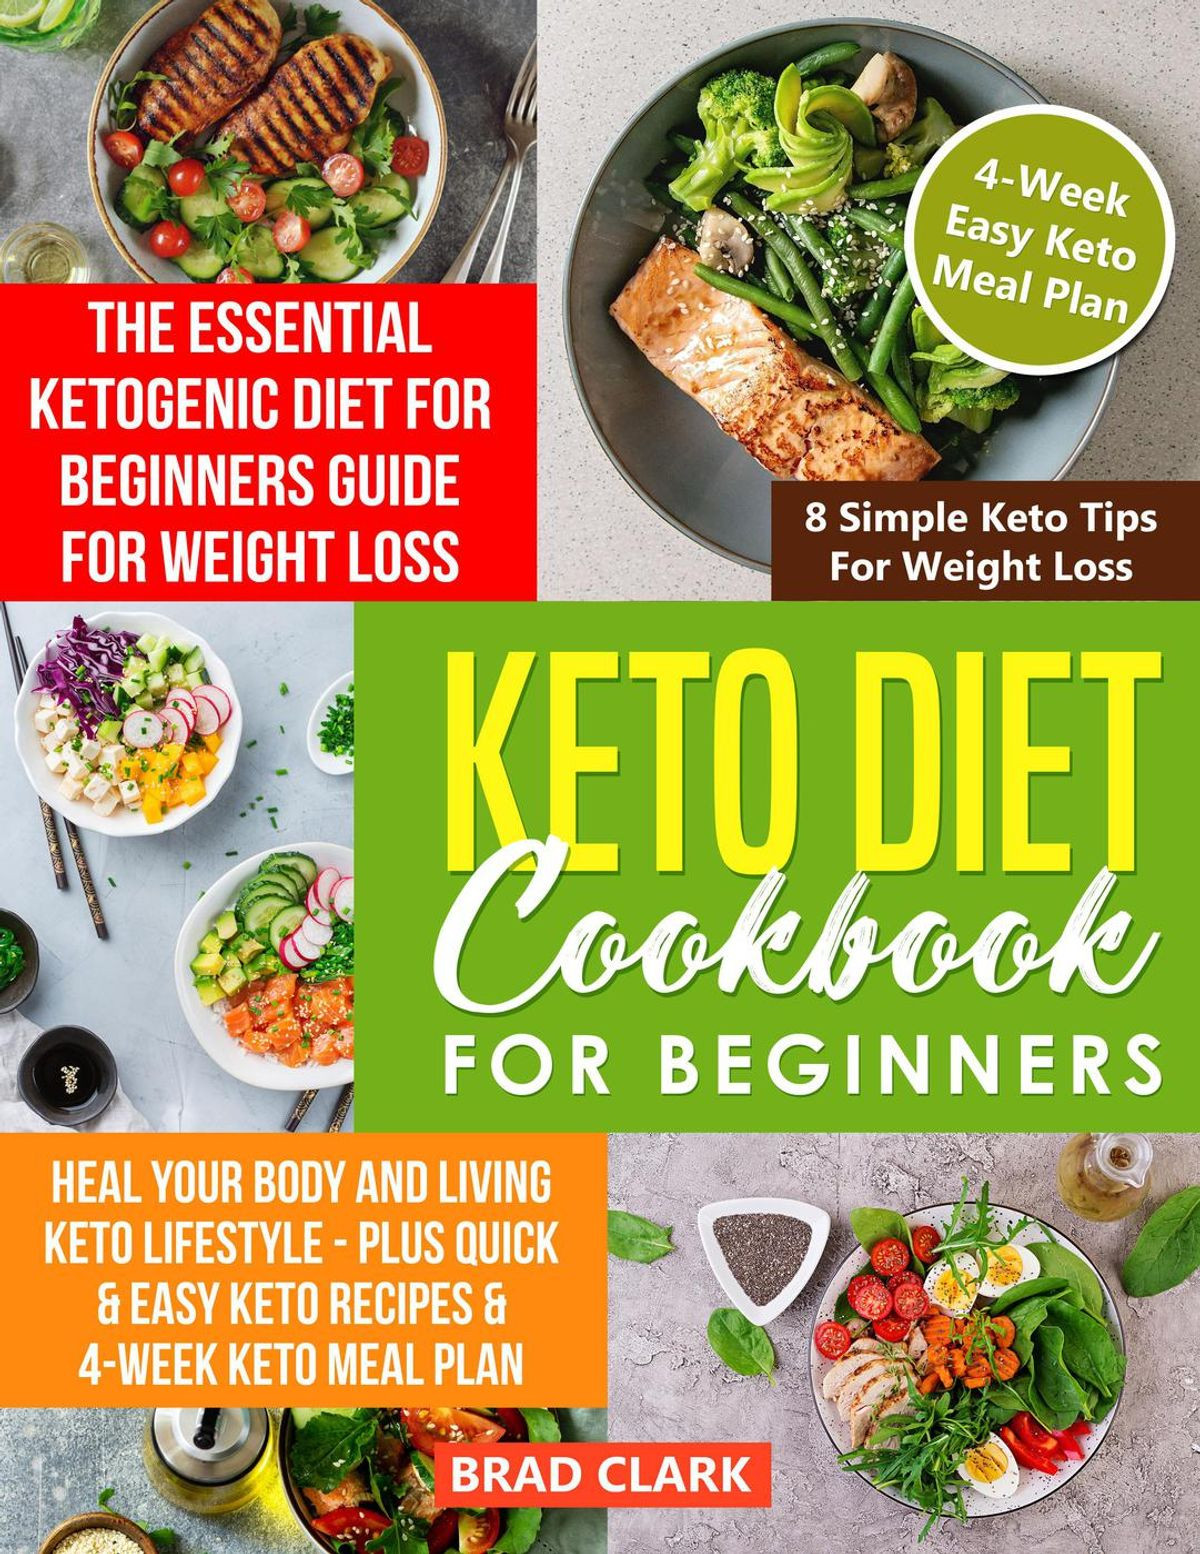 Keto Diet For Beginners Losing Weight Recipes
 Keto Diet Cookbook for Beginners The Essential Ketogenic